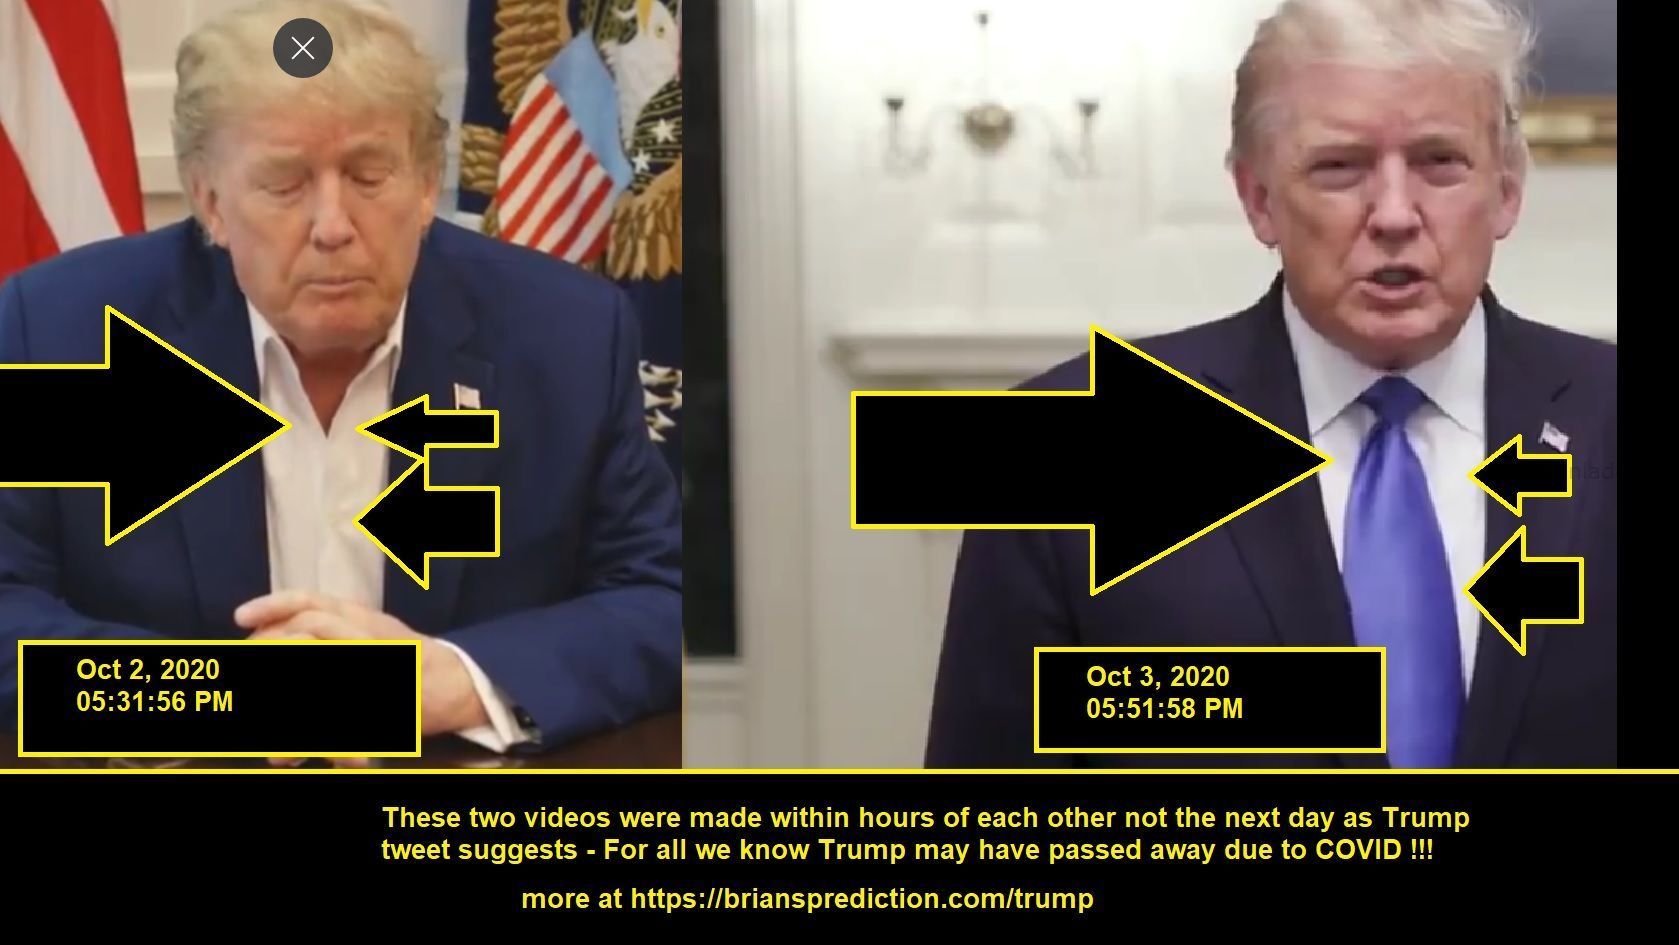 These Two Videos Were Made Within Hours Of Each Other Not The Next Day As Trumps Tweet Suggests For All We Know Trump Ma...
These Two Videos Were Made Within Hours Of Each Other Not The Next Day As Trumps Tweet Suggests - For All We Know Trump May Have Passed Away Due To Covid  More At   https://briansprediction.com/Trump
